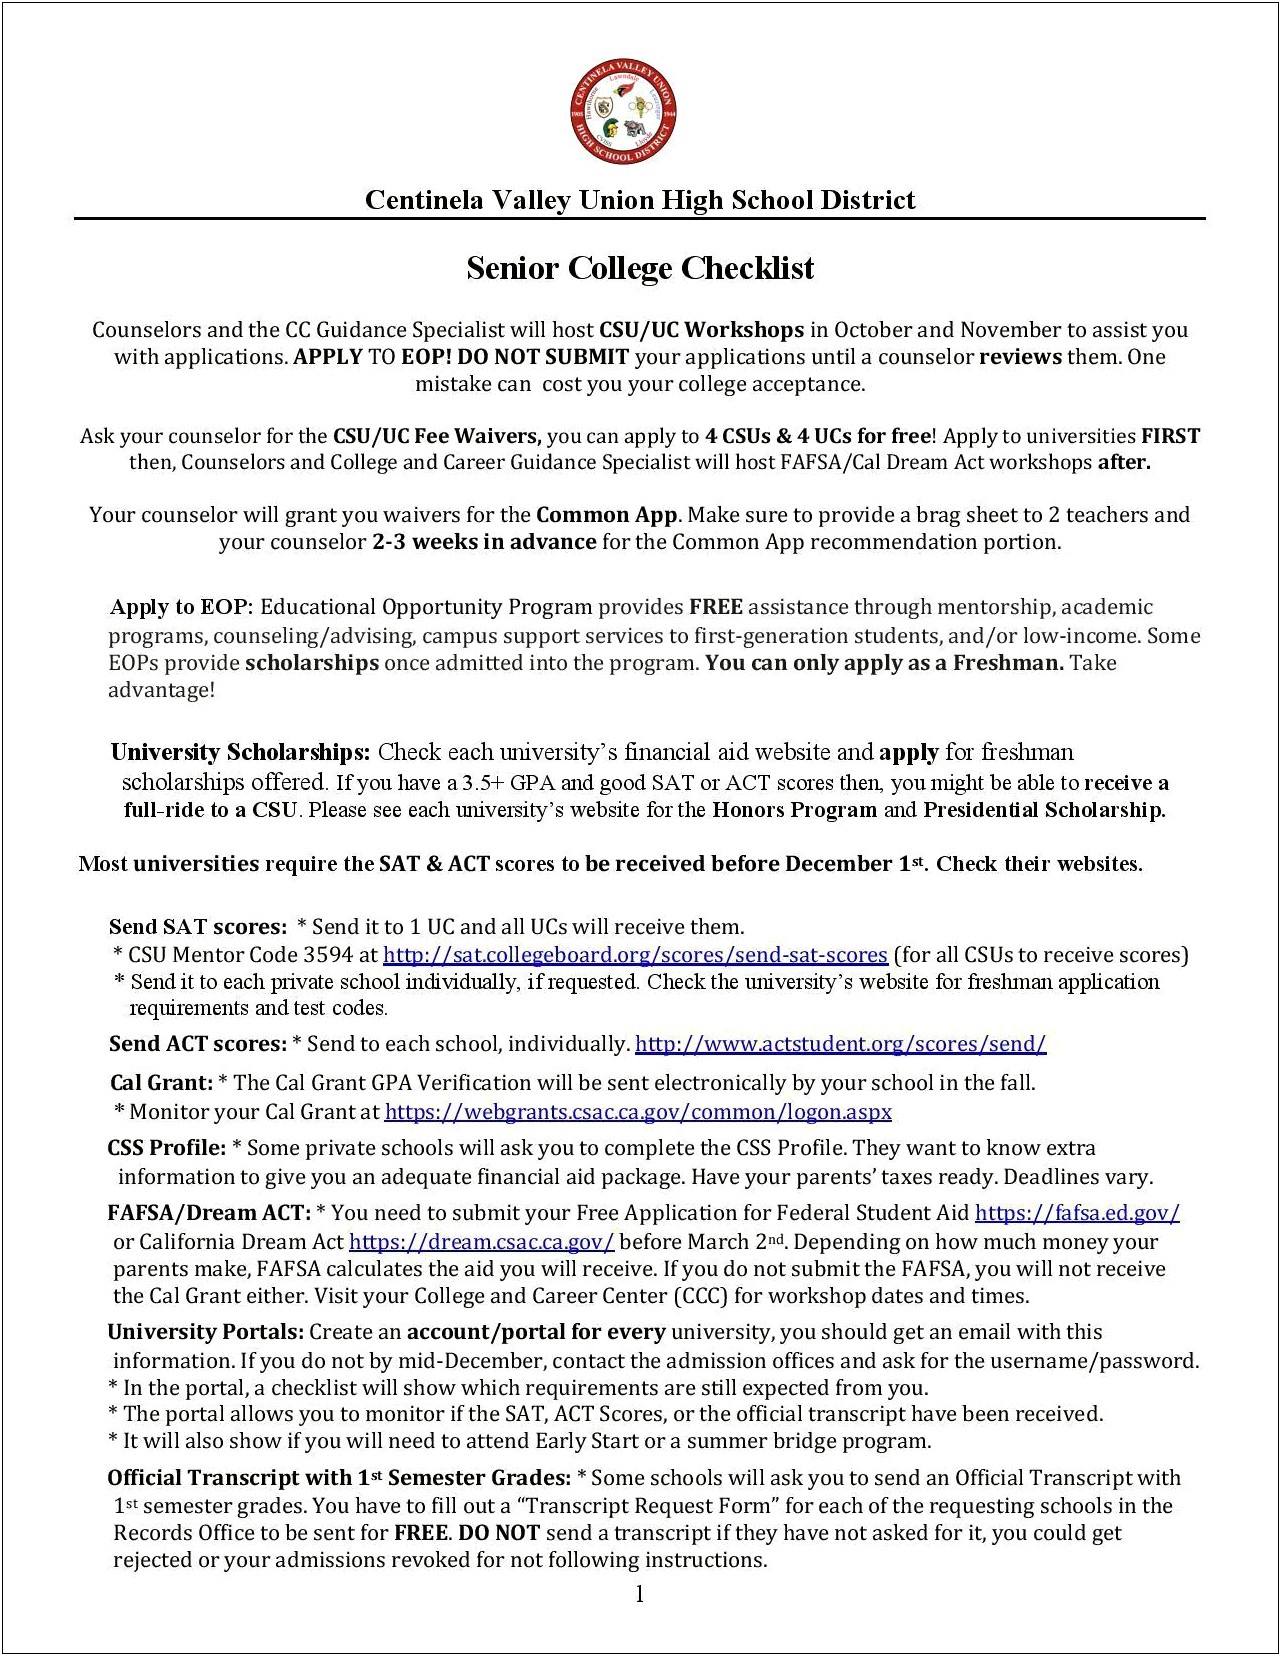 Resumes For High School Seniors Applying To College